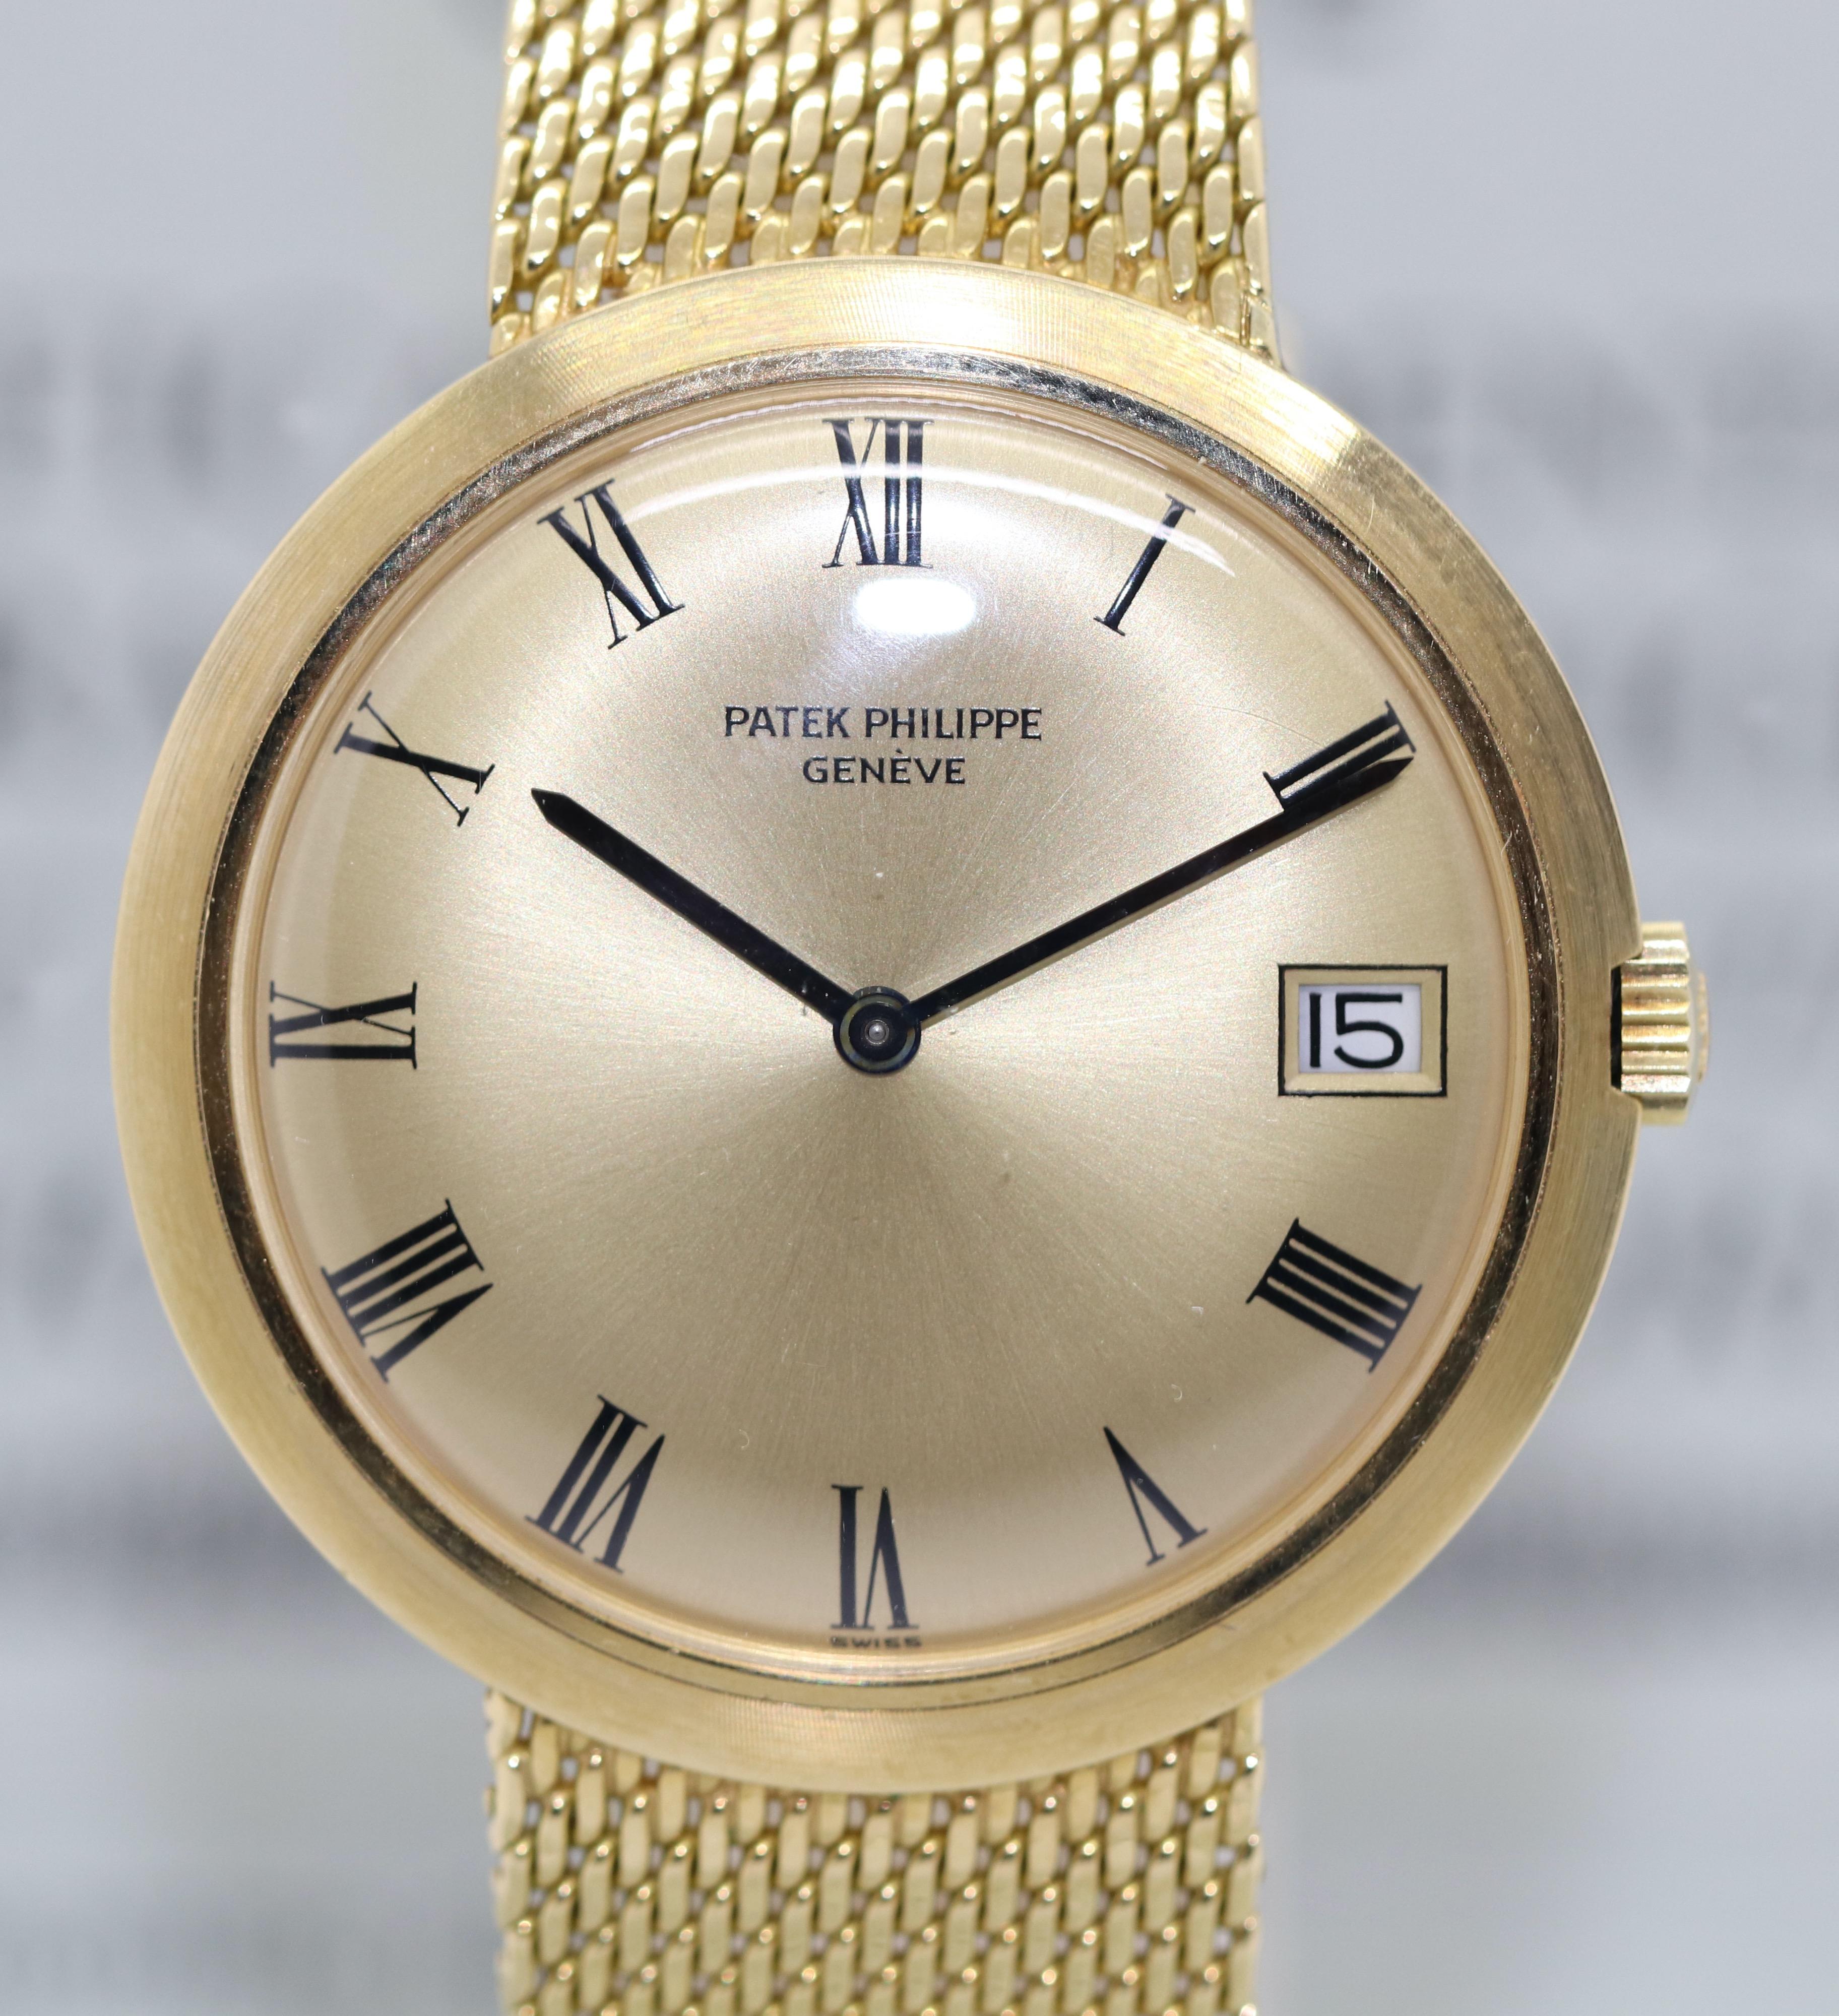 18 Karat Gold Patek Philippe Calatrava Ref. 3565/1. Full Set. Mint. Unpolished.

From 1st (private) owner. Beautiful Collectors Watch in perfect condition.